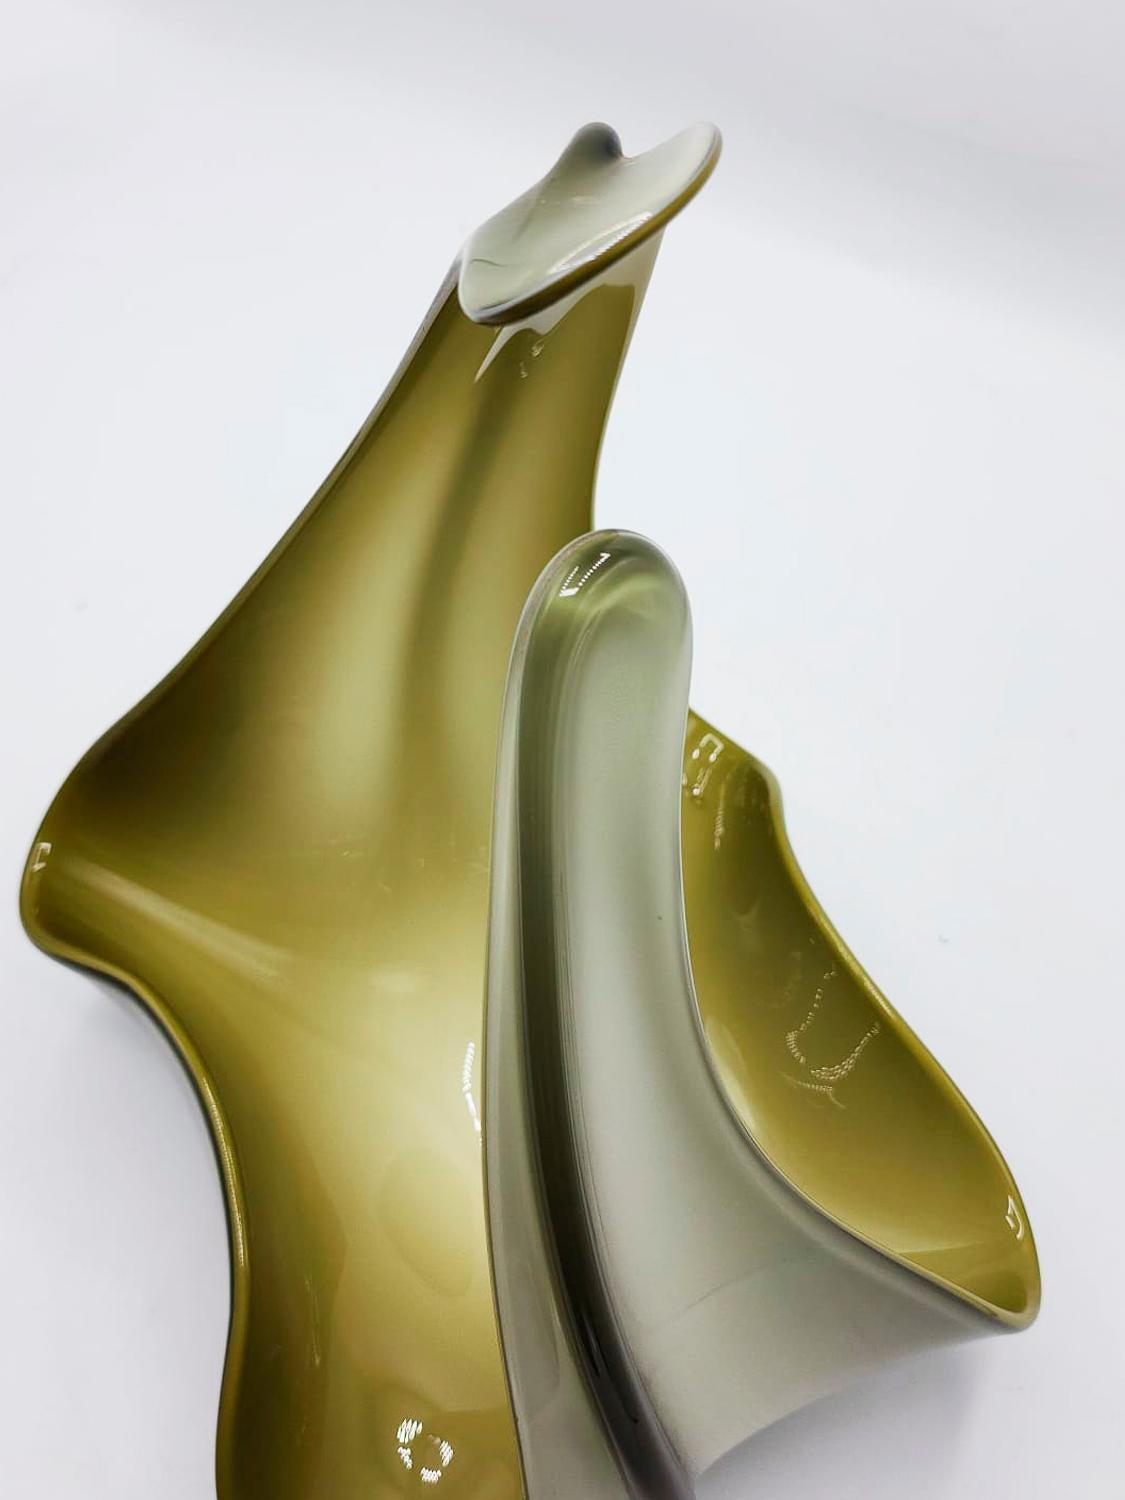 Italian modernist Murano glass vase with green tones for centerpiece For Sale 2